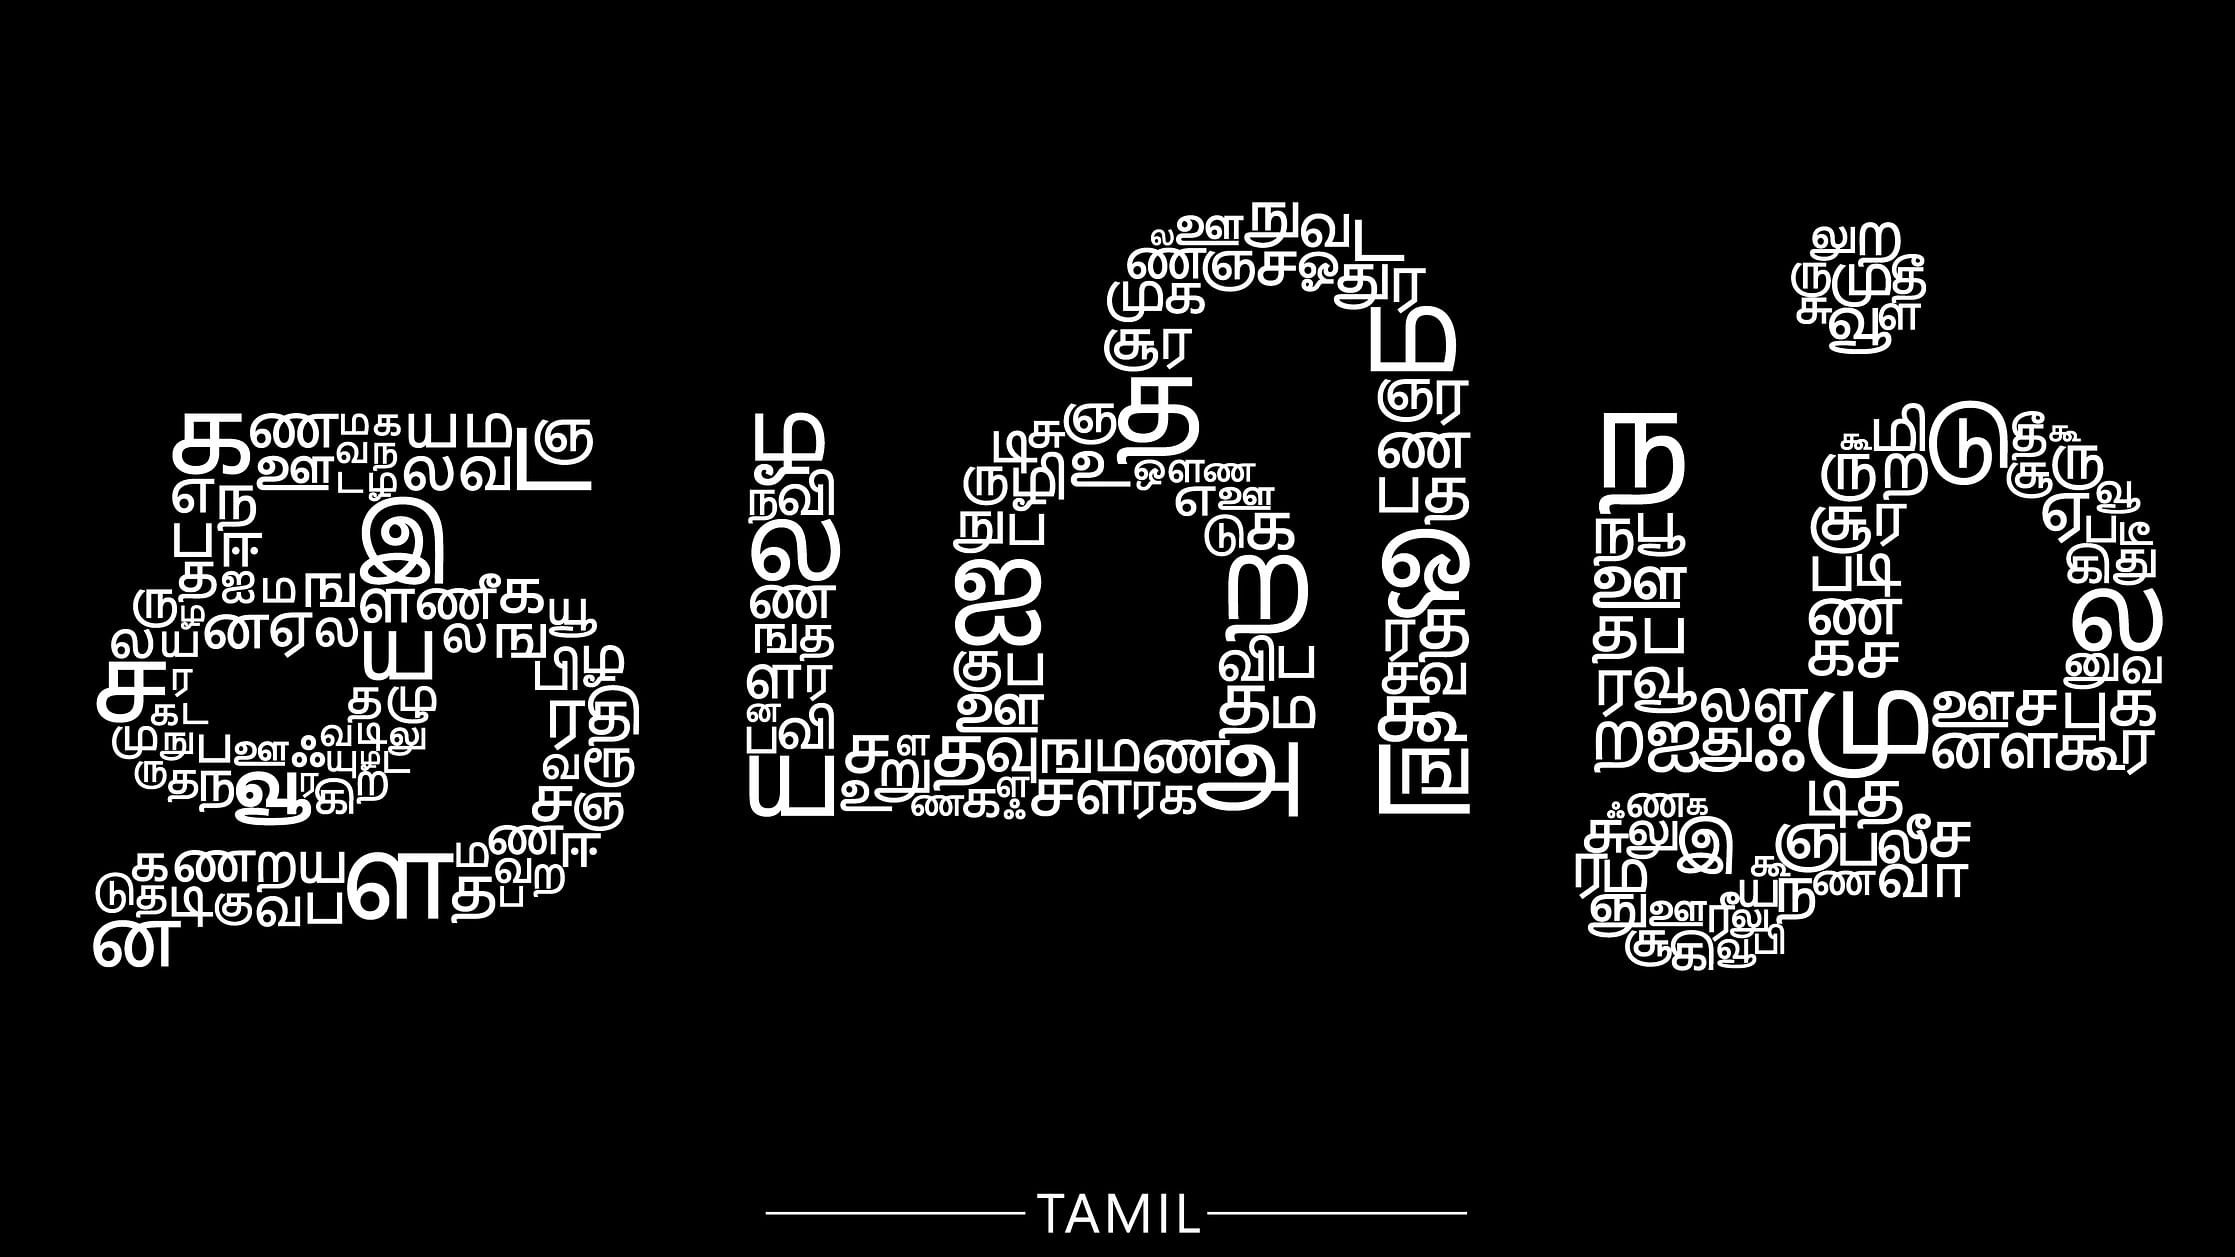 <div class="paragraphs"><p>Except the AIADMK nominee, the names of candidates of all three major political parties - DMK, BJP, and Naam Tamizhar Katchi (NTK) - start with the word Tamil. Representative image.</p></div>